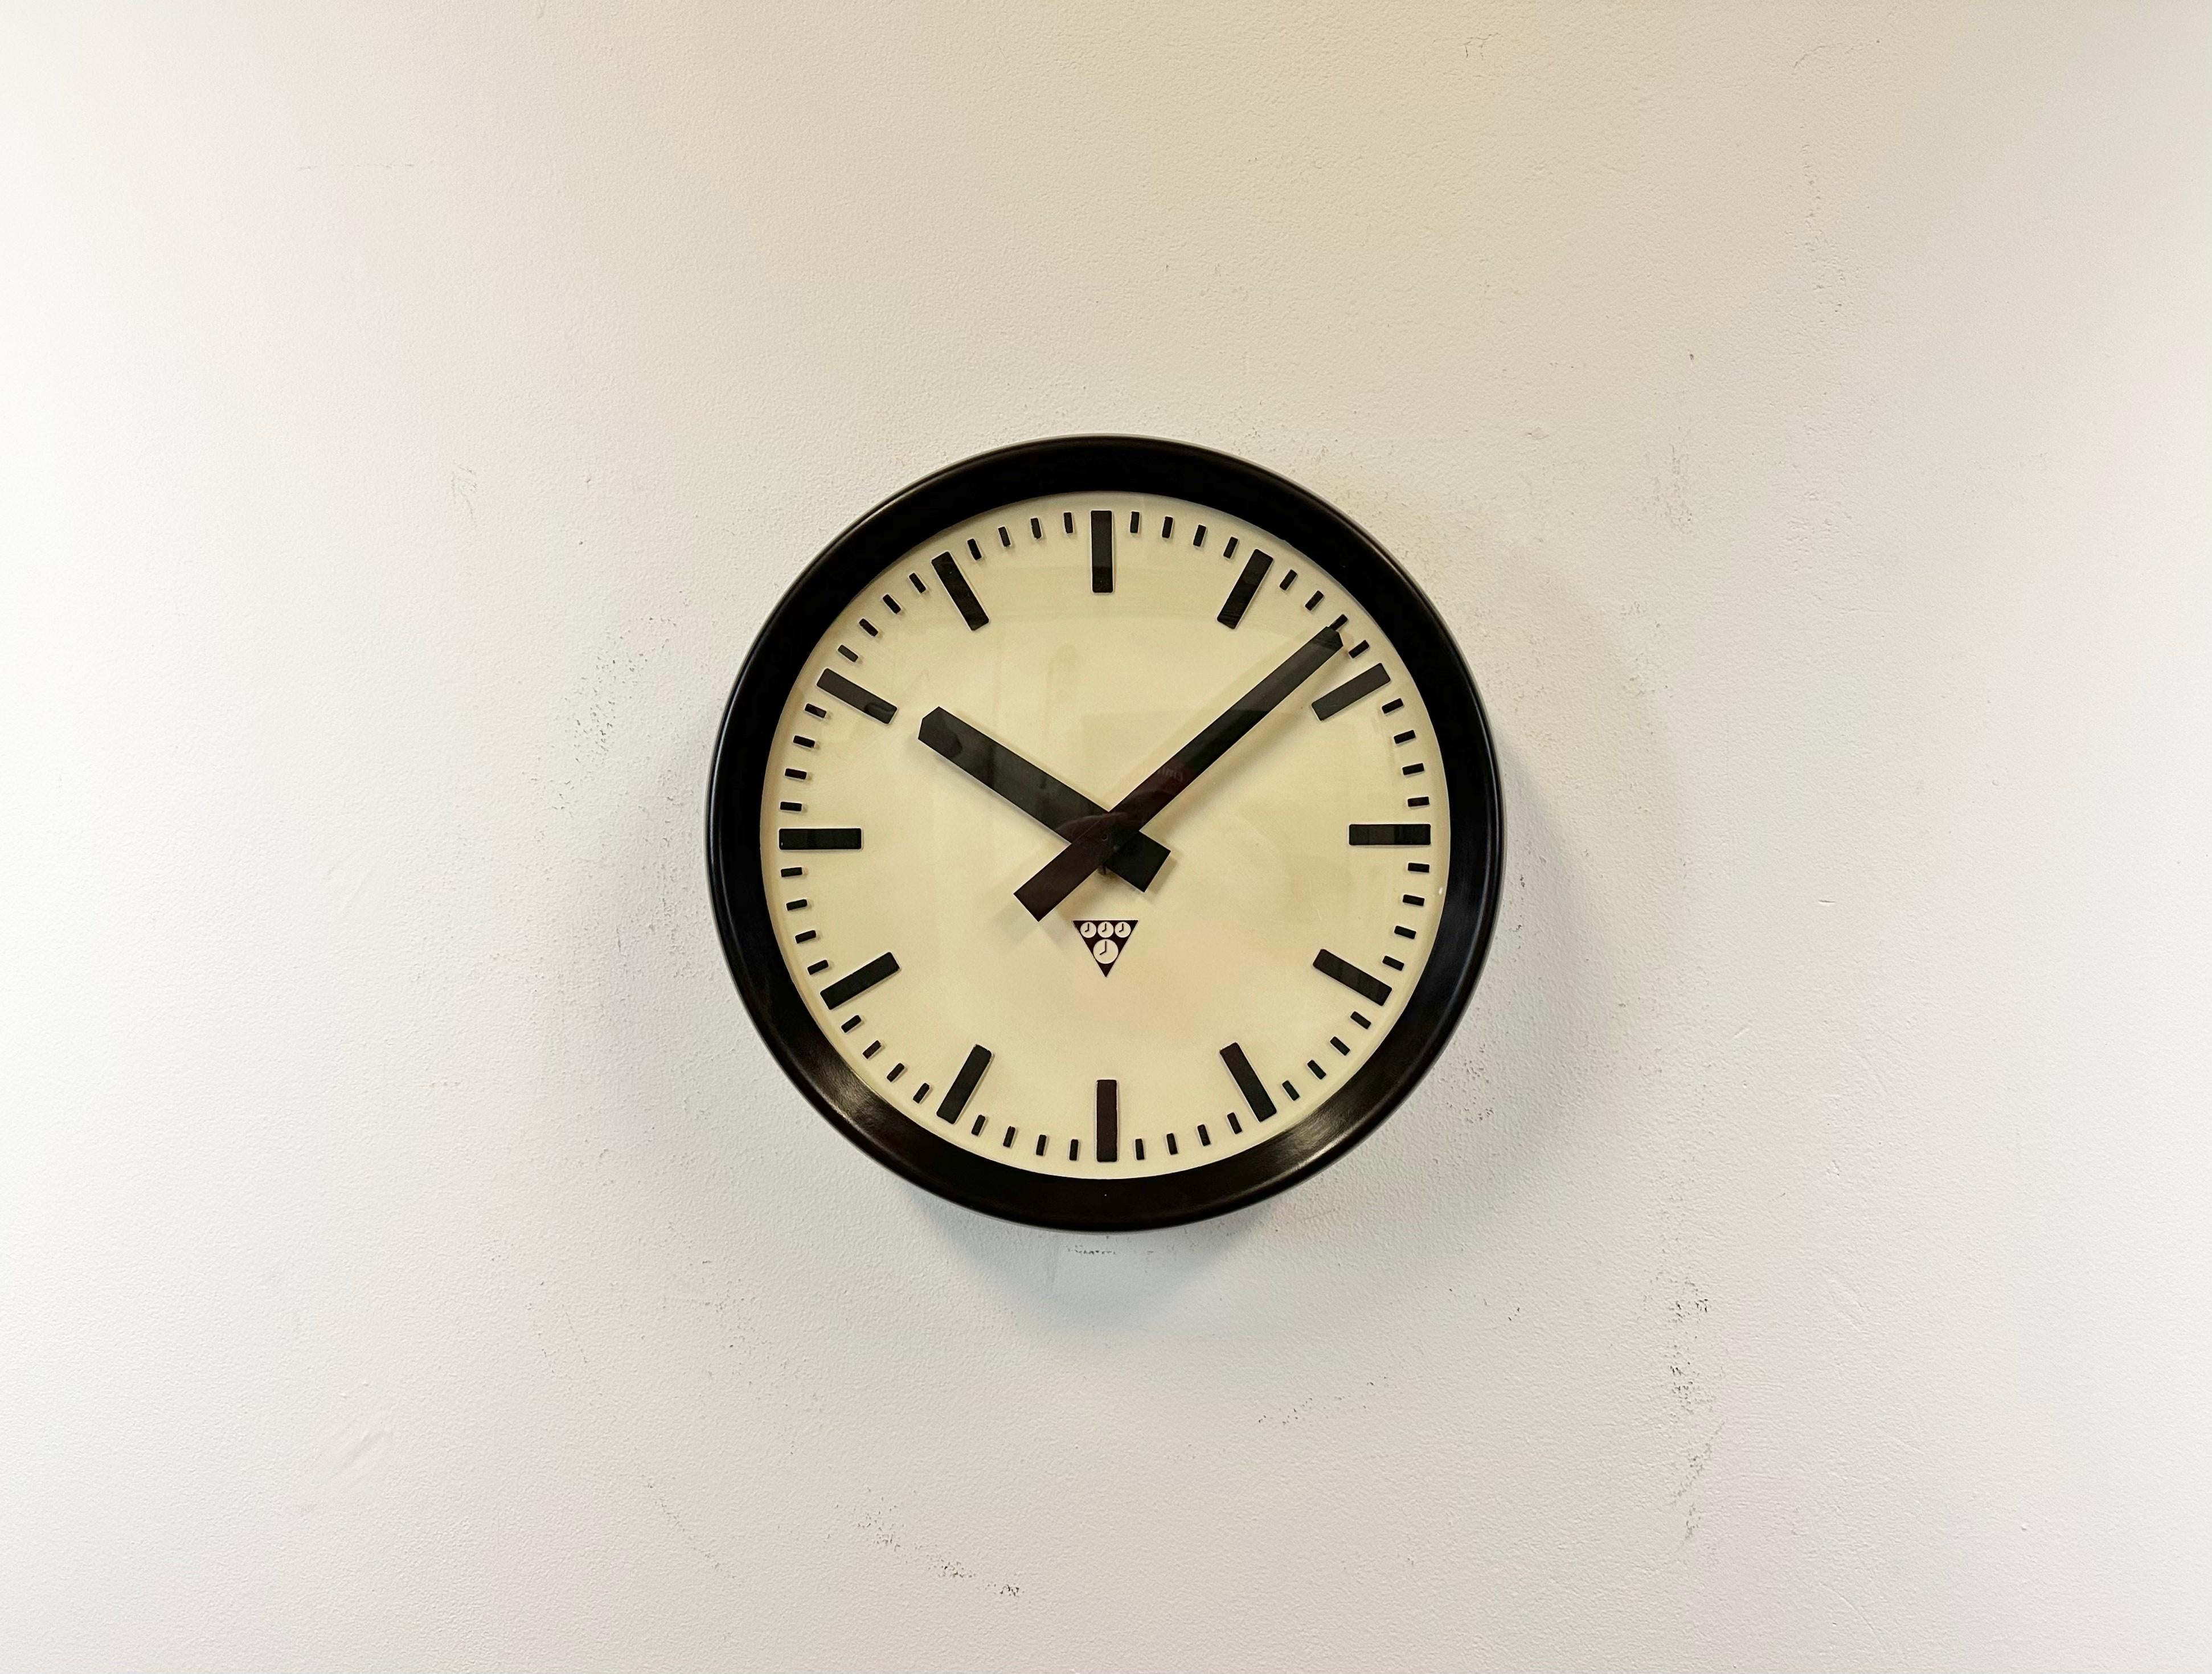 Wall clock produced by Pragotron in former Czechoslovakia during the 1960s. It features a brown bakelite frame, a plastic dial, an aluminium hands and a convex clear glass cover. The piece has been converted into a battery-powered clockwork and